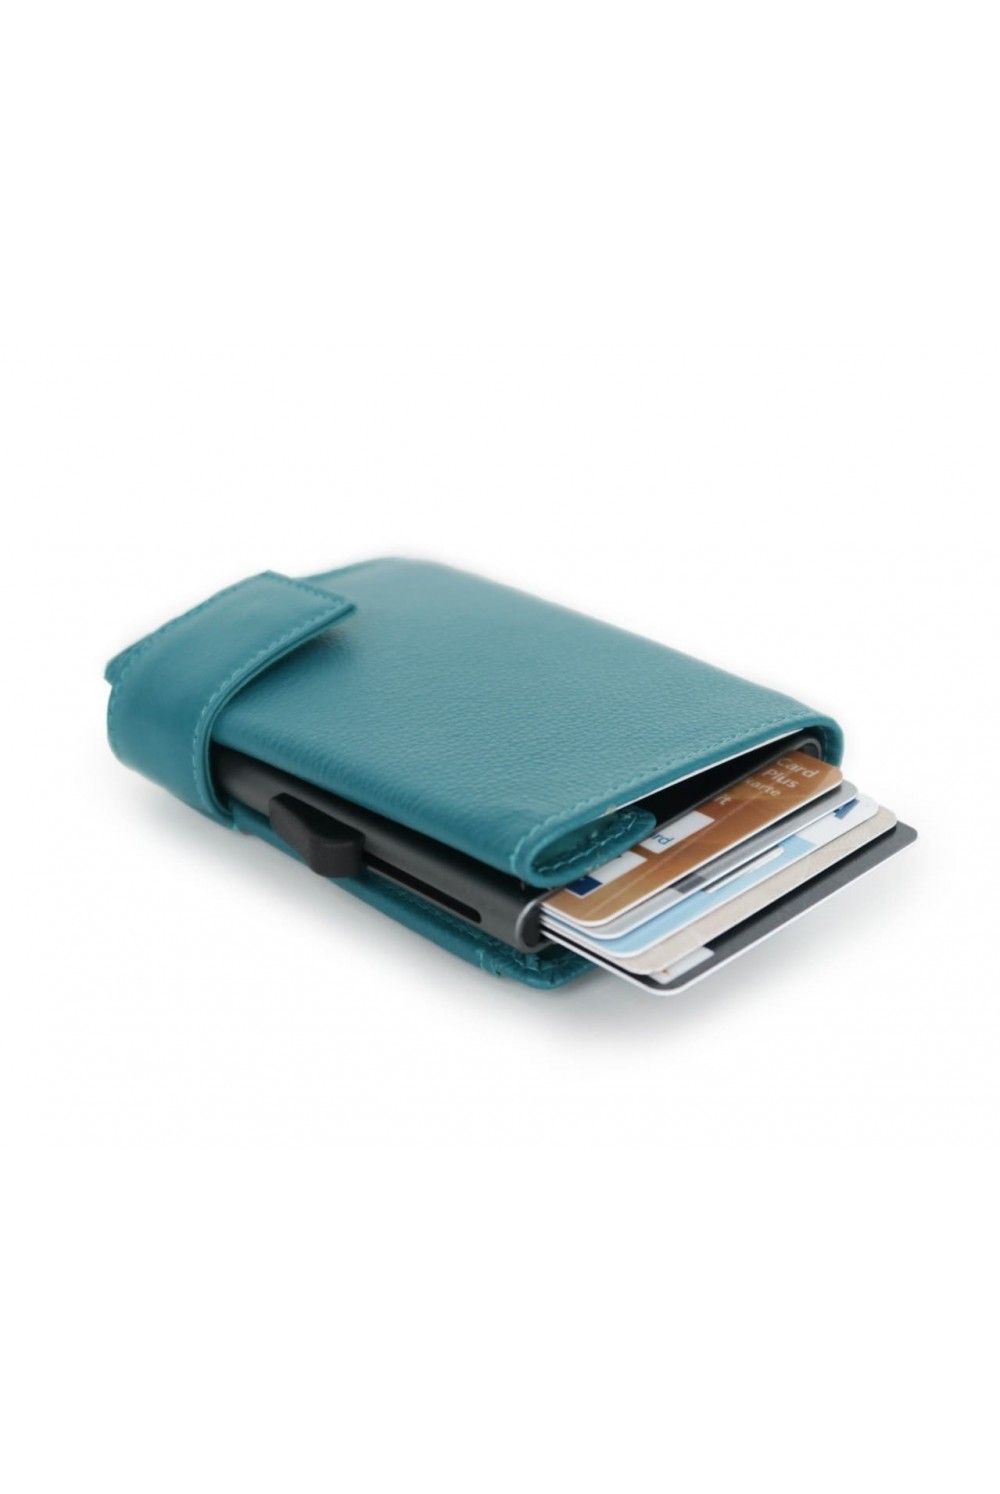 Porte-cartes SecWal RV Leather turquoise